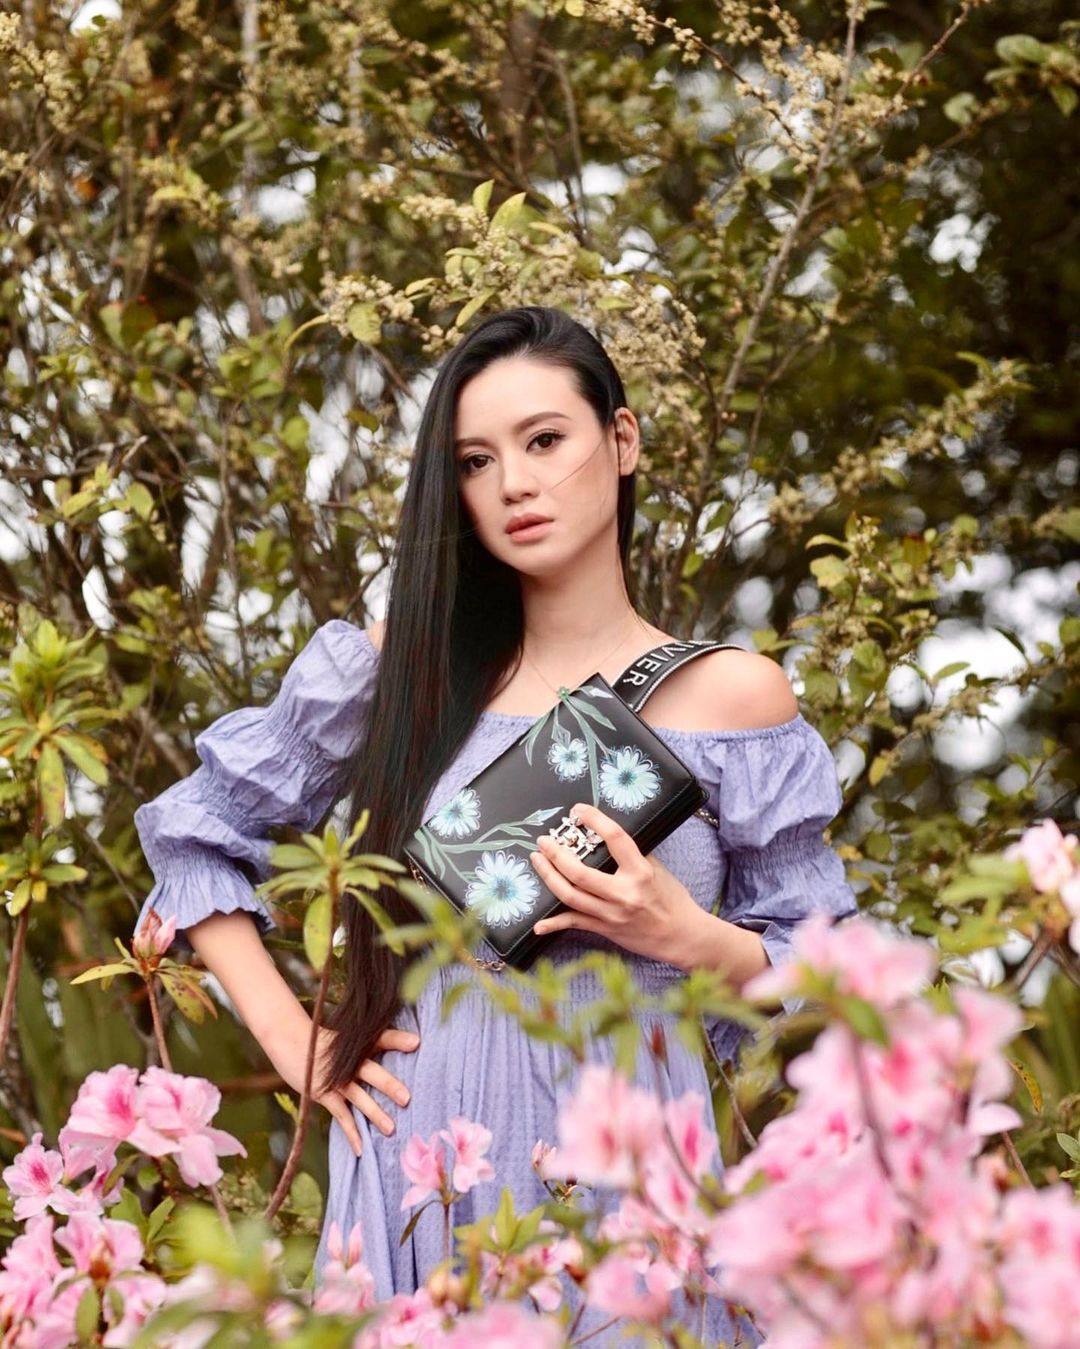 Emily Lam-Ho is a fashionista and trendsetter in Hong Kong. Photo: @emilylam.ho/Instagram